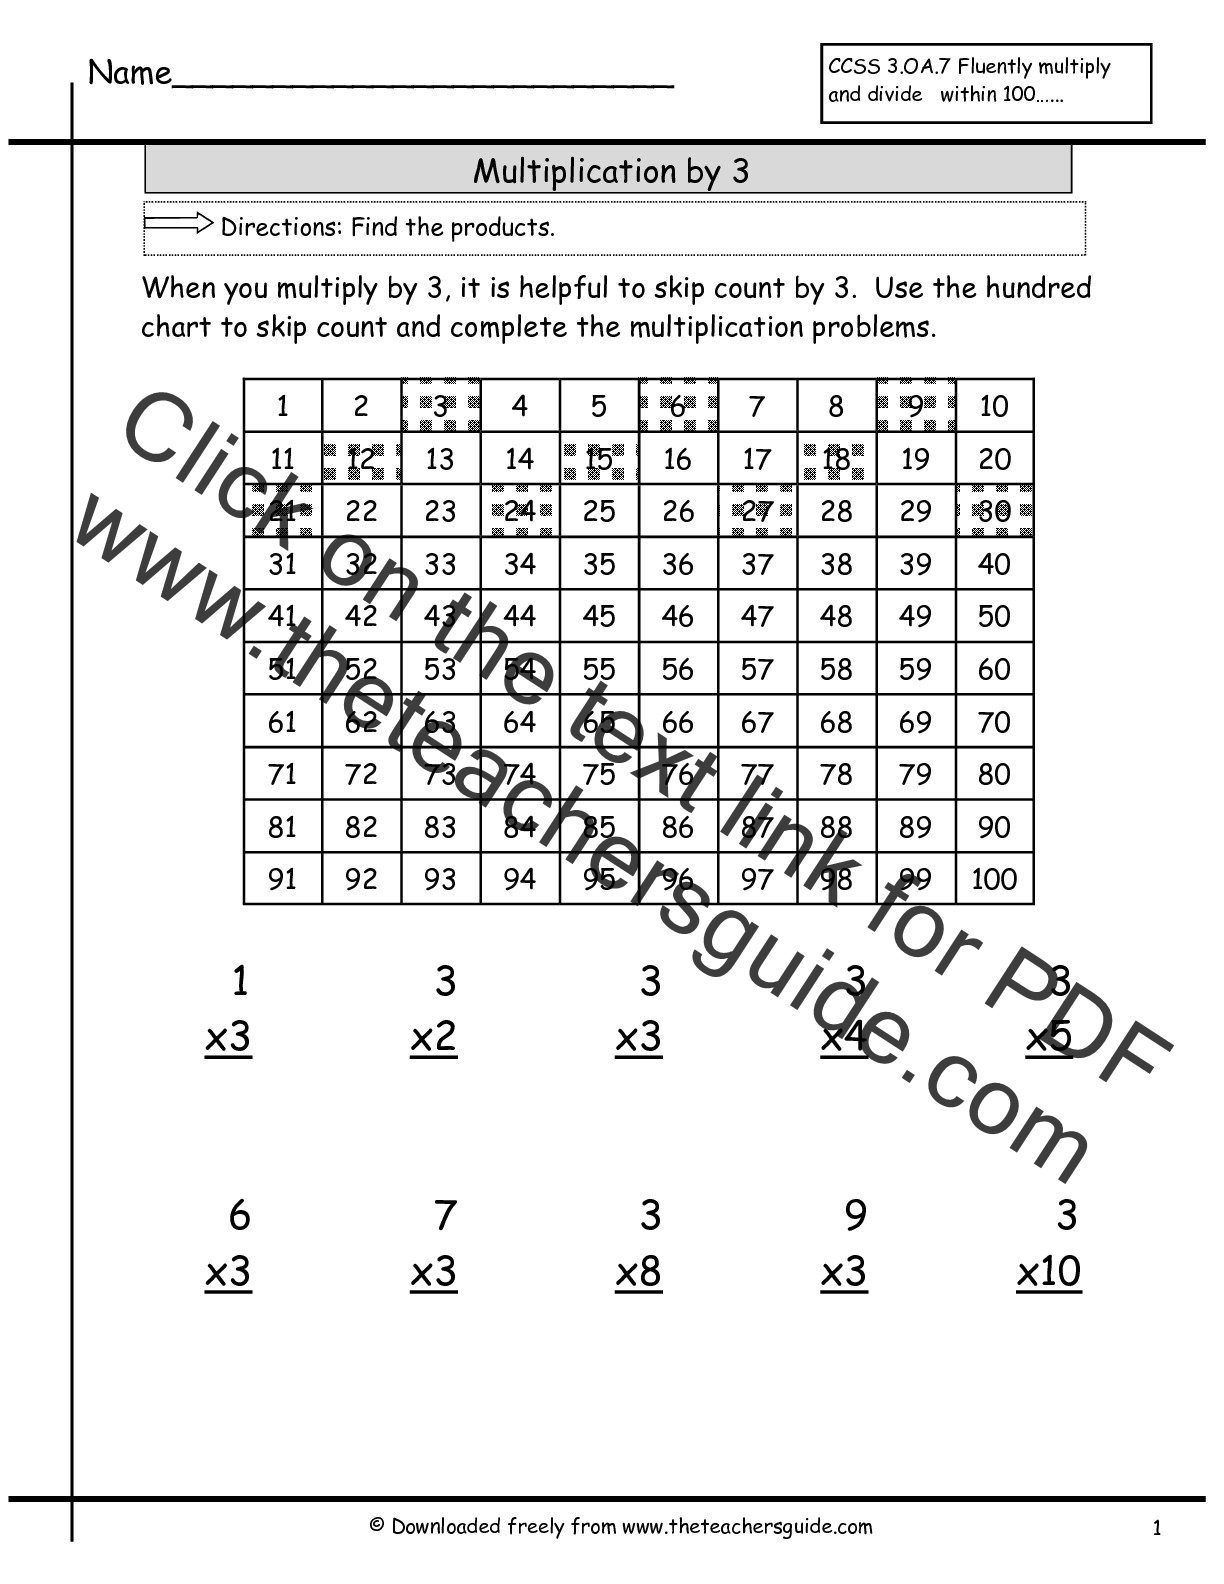 multiplication-facts-worksheets-4th-grade